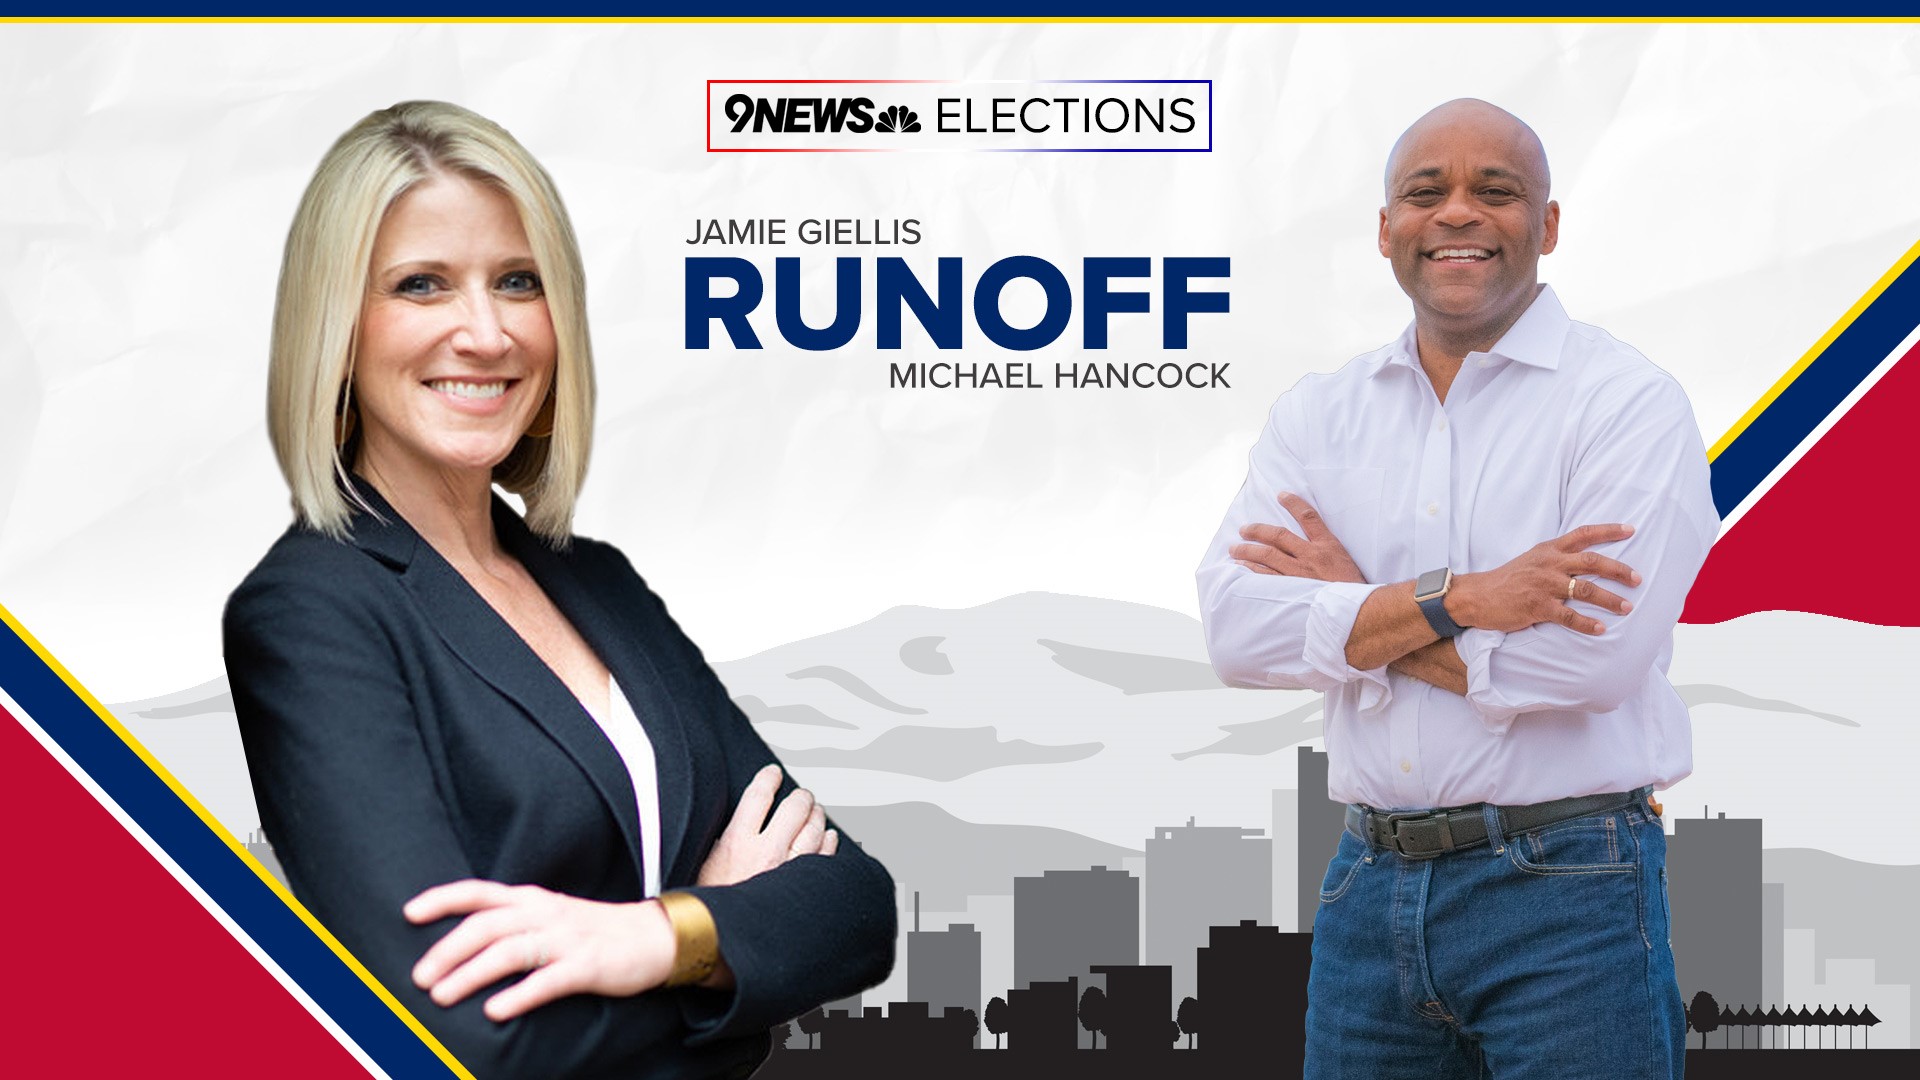 Despite earning the most votes in the municipal election, incumbent Denver Mayor Hancock has failed to garner the 51 percent majority needed to secure another term. This means that he will compete in a runoff election against challenger Jamie Giellis, an urban planner and the president of the RiNo Arts District.